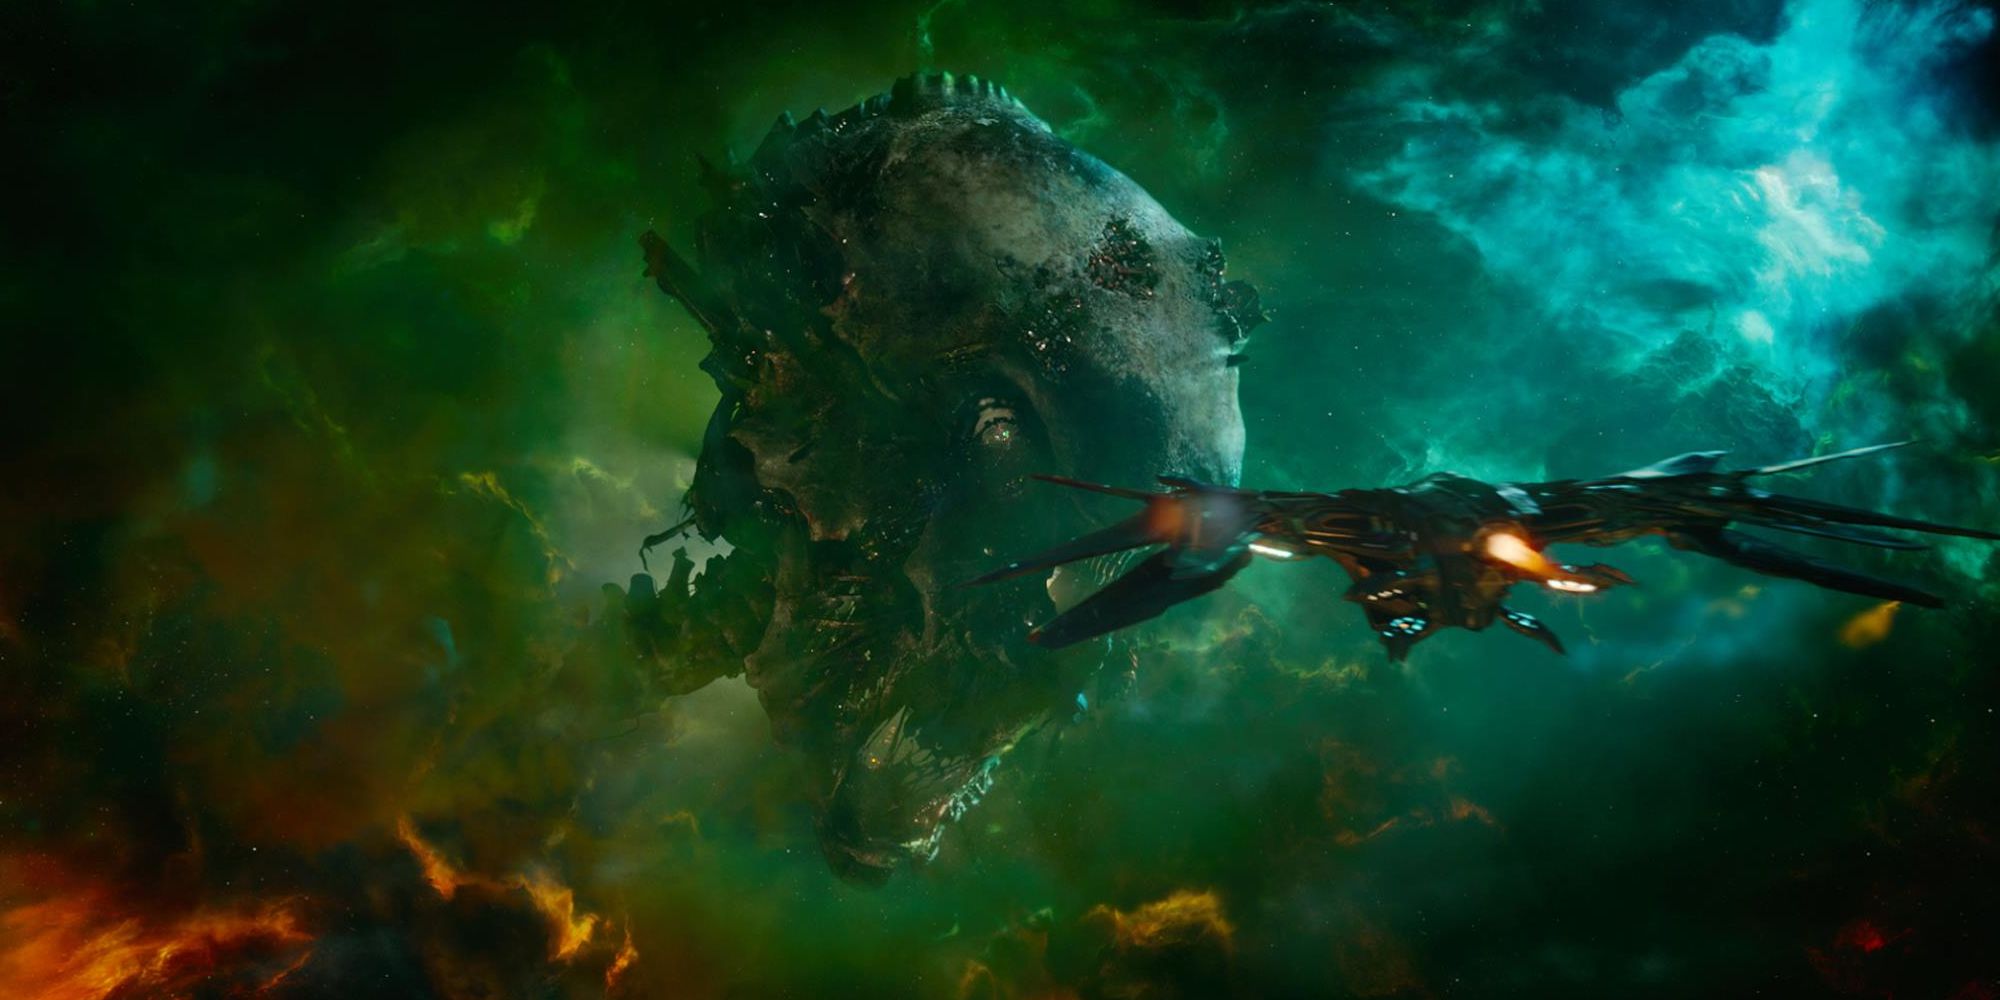 Knowhere as it appears in space in the MCU